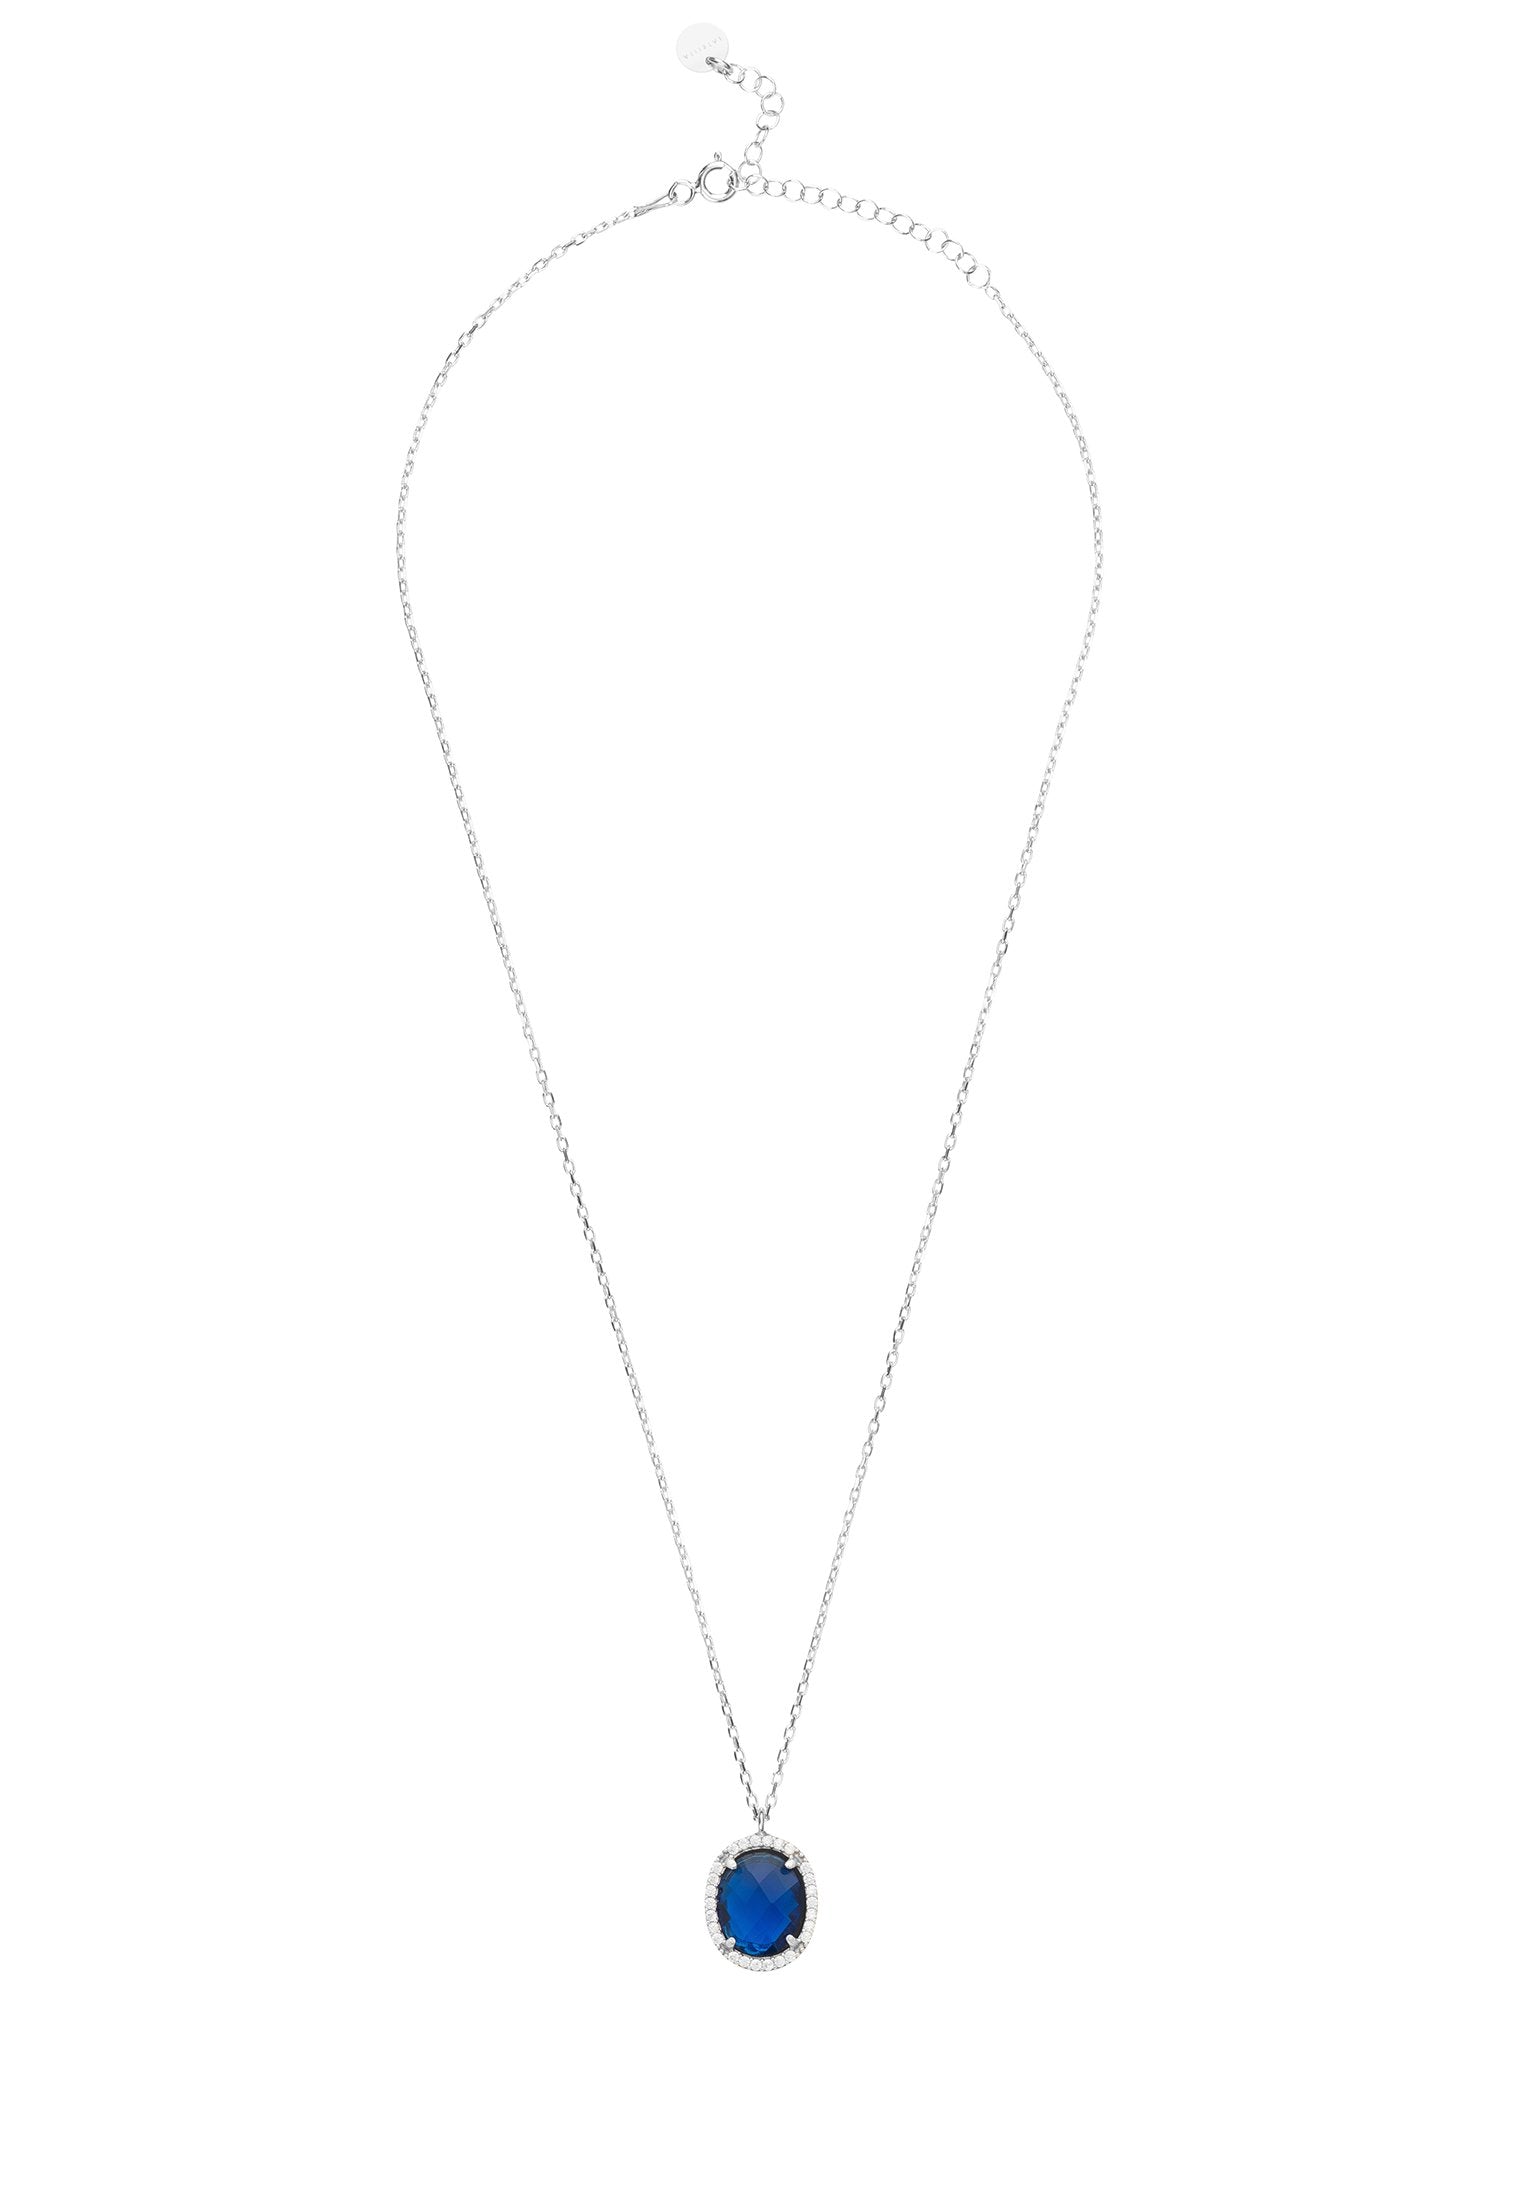 Sapphire Oval Gemstone Pendant Necklace in Sterling Silver with CZ Detailing - Jewelry & Watches - Bijou Her -  -  - 